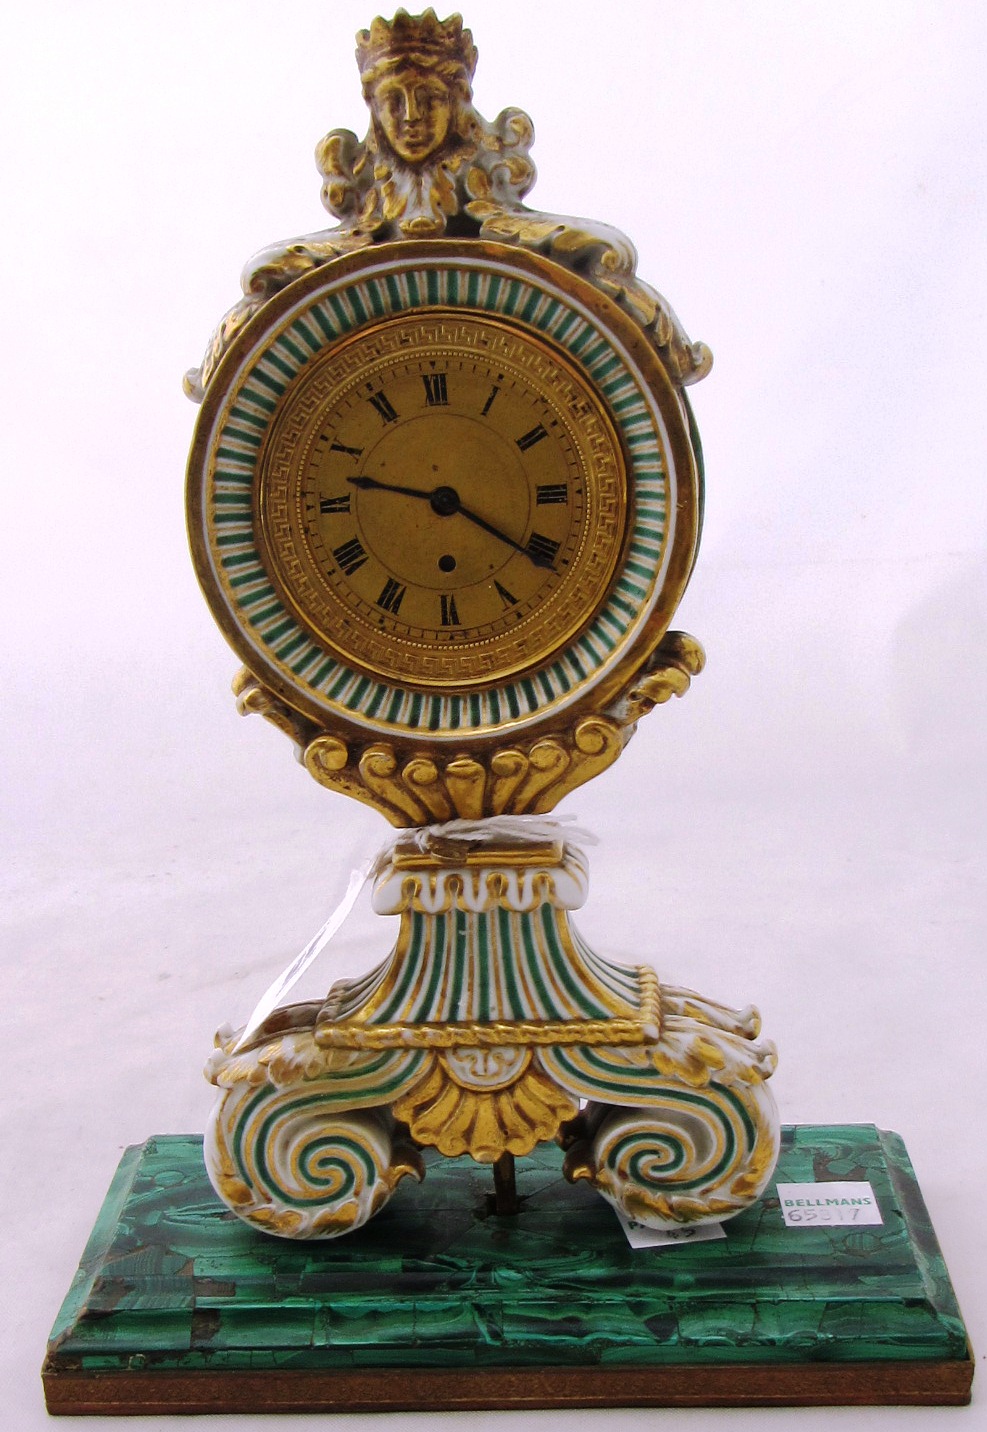 WITHDRAWN A porcelain clock case, mid 19th century, possibly Russian, Imperial Porcelain factory,